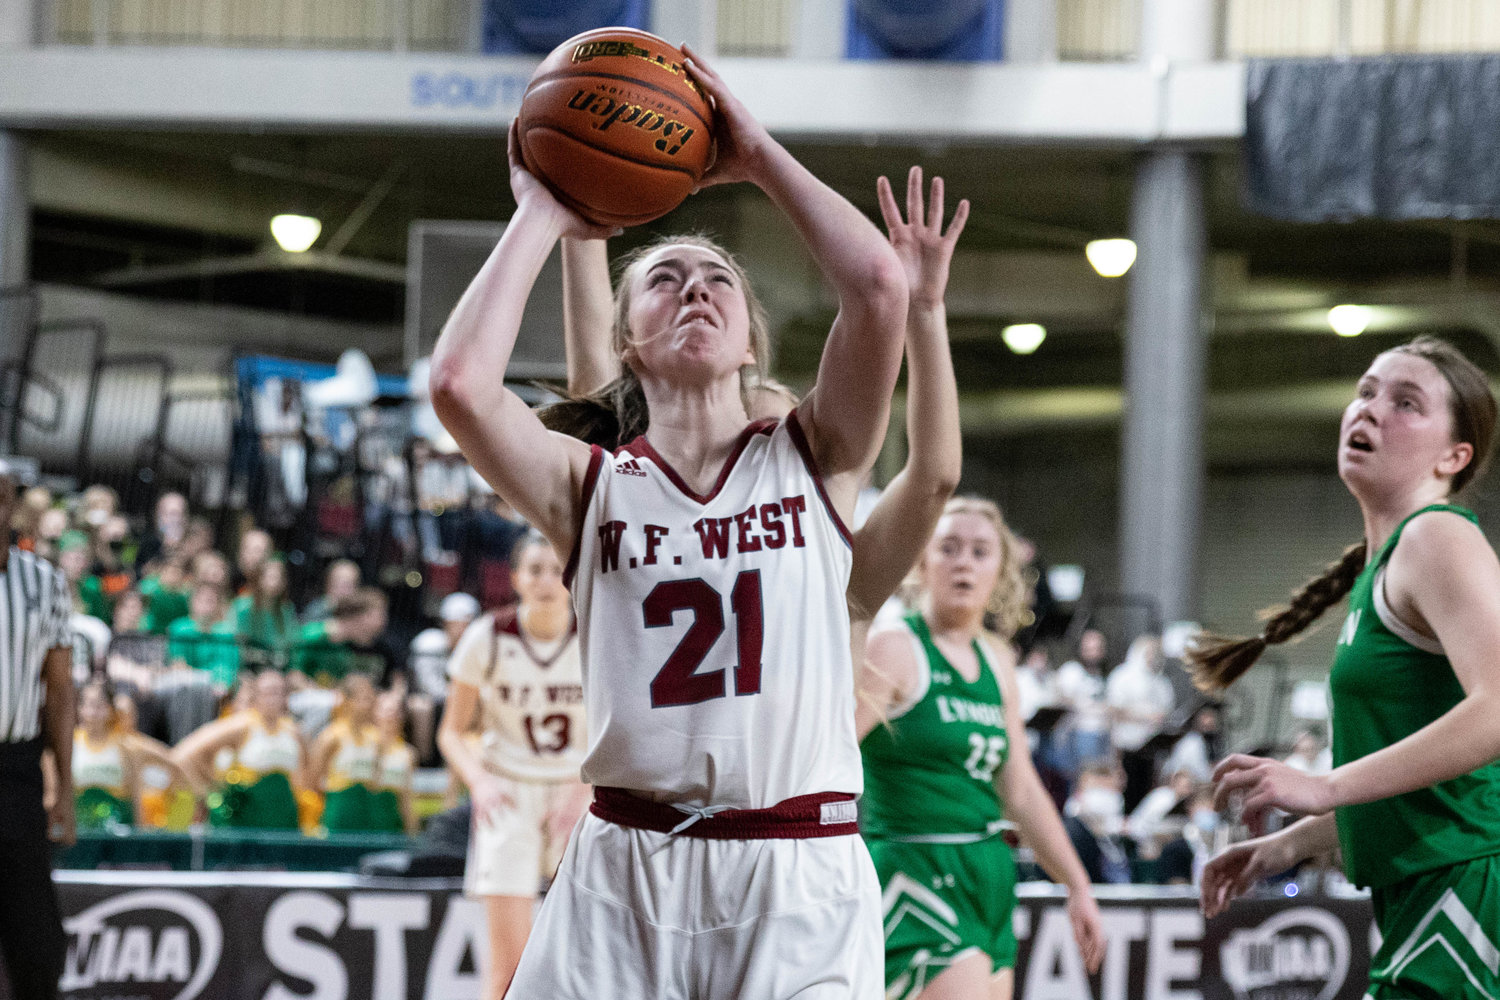 W.F. West forward Morgan Rogerson goes up for a shot attempt against Lynden in the 2A State Tournament at the Yakima Valley SunDome March 2.